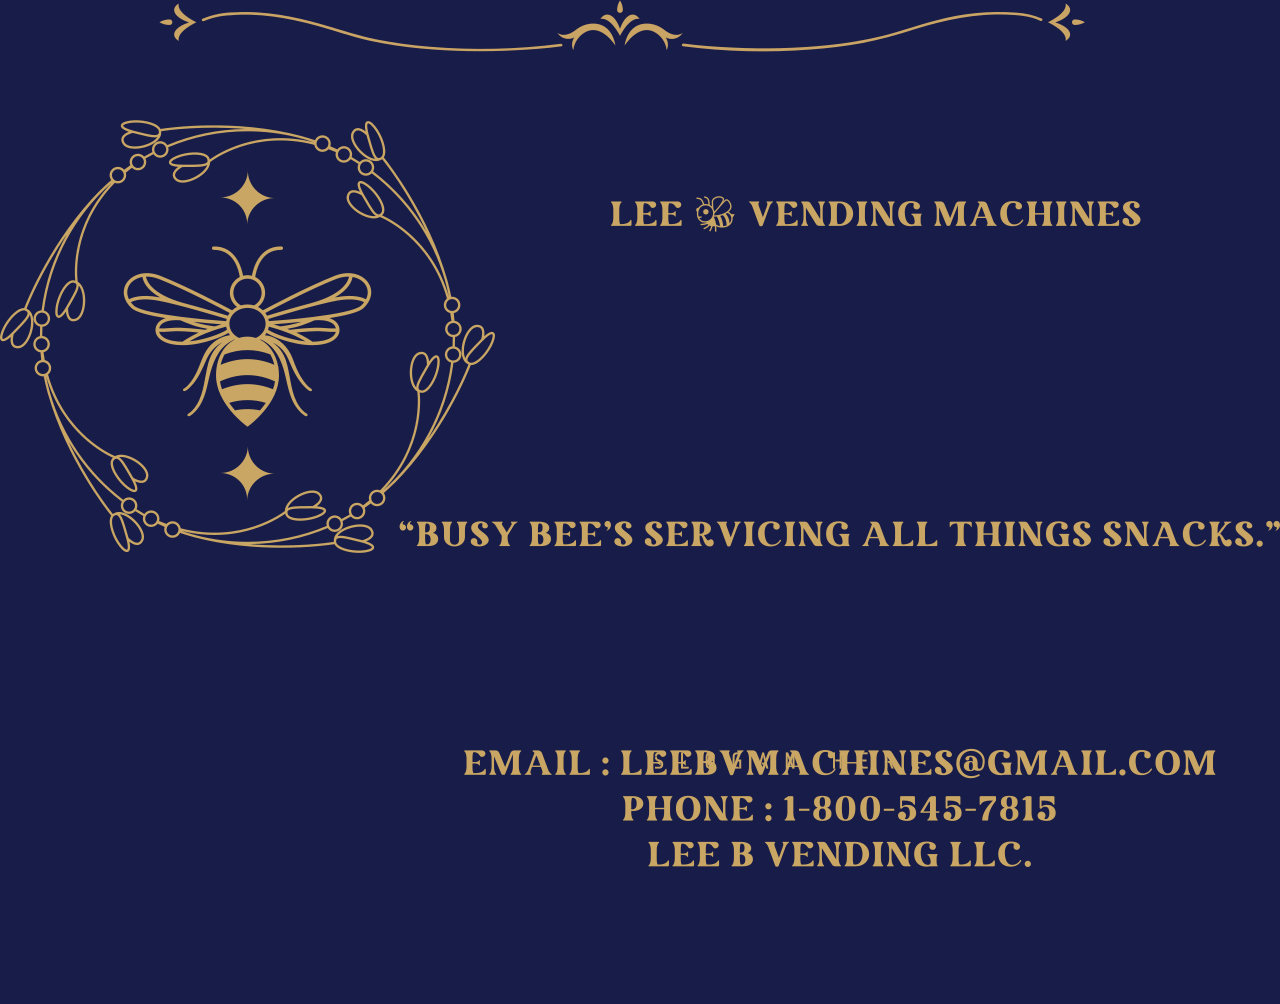         Lee 🐝 Vending Machines






“Busy Bee’s Servicing All Things Snacks.”




Email : LeeBVMachines@gmail.com
Phone : 1-800-545-7815
Lee B Vending LLC.


's logo